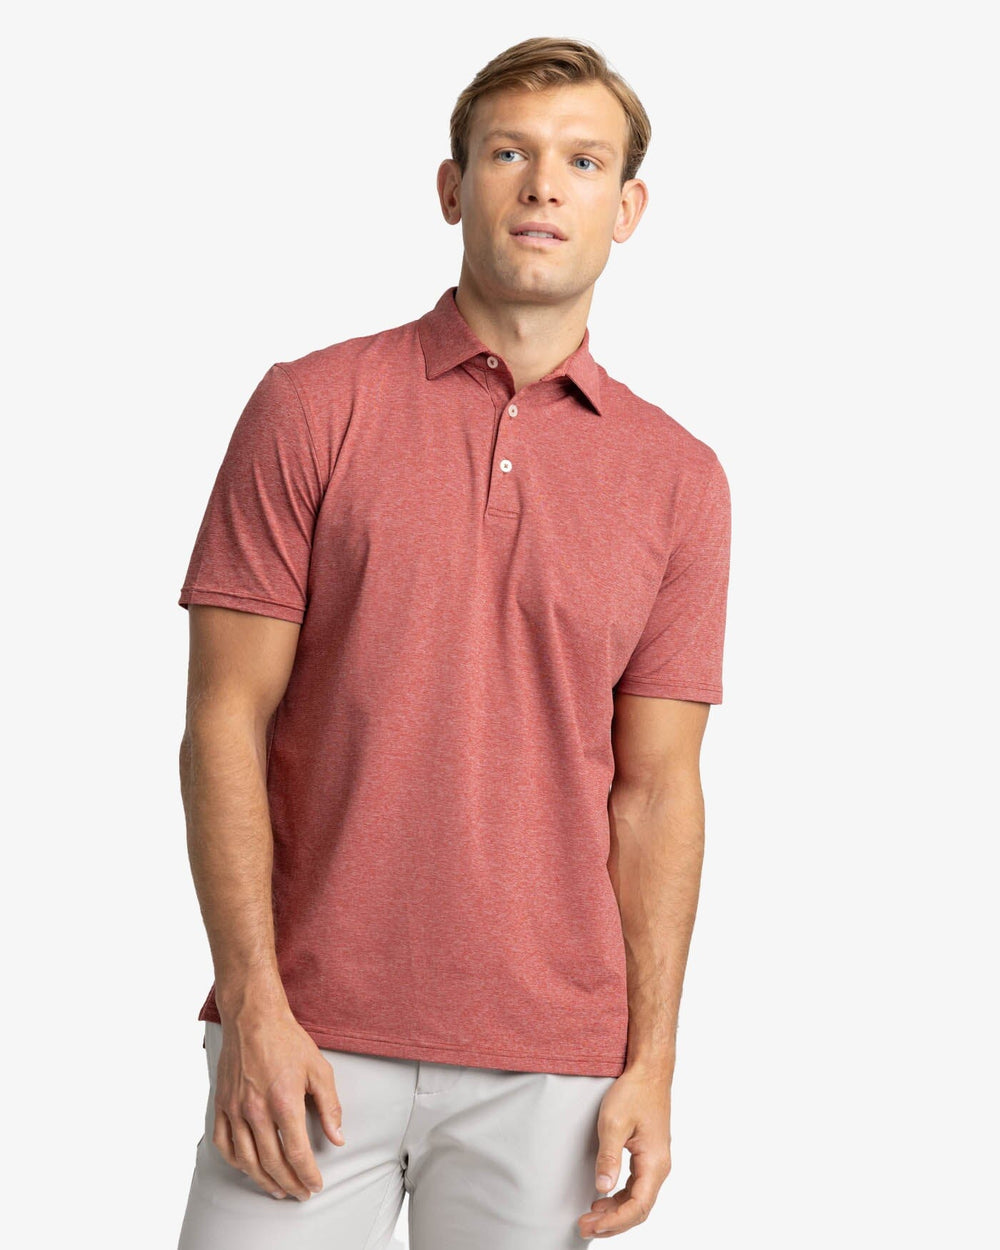 The front view of the Southern Tide brrr-eeze Heather Performance Polo Shirt by Southern Tide - Heather Tuscany Red